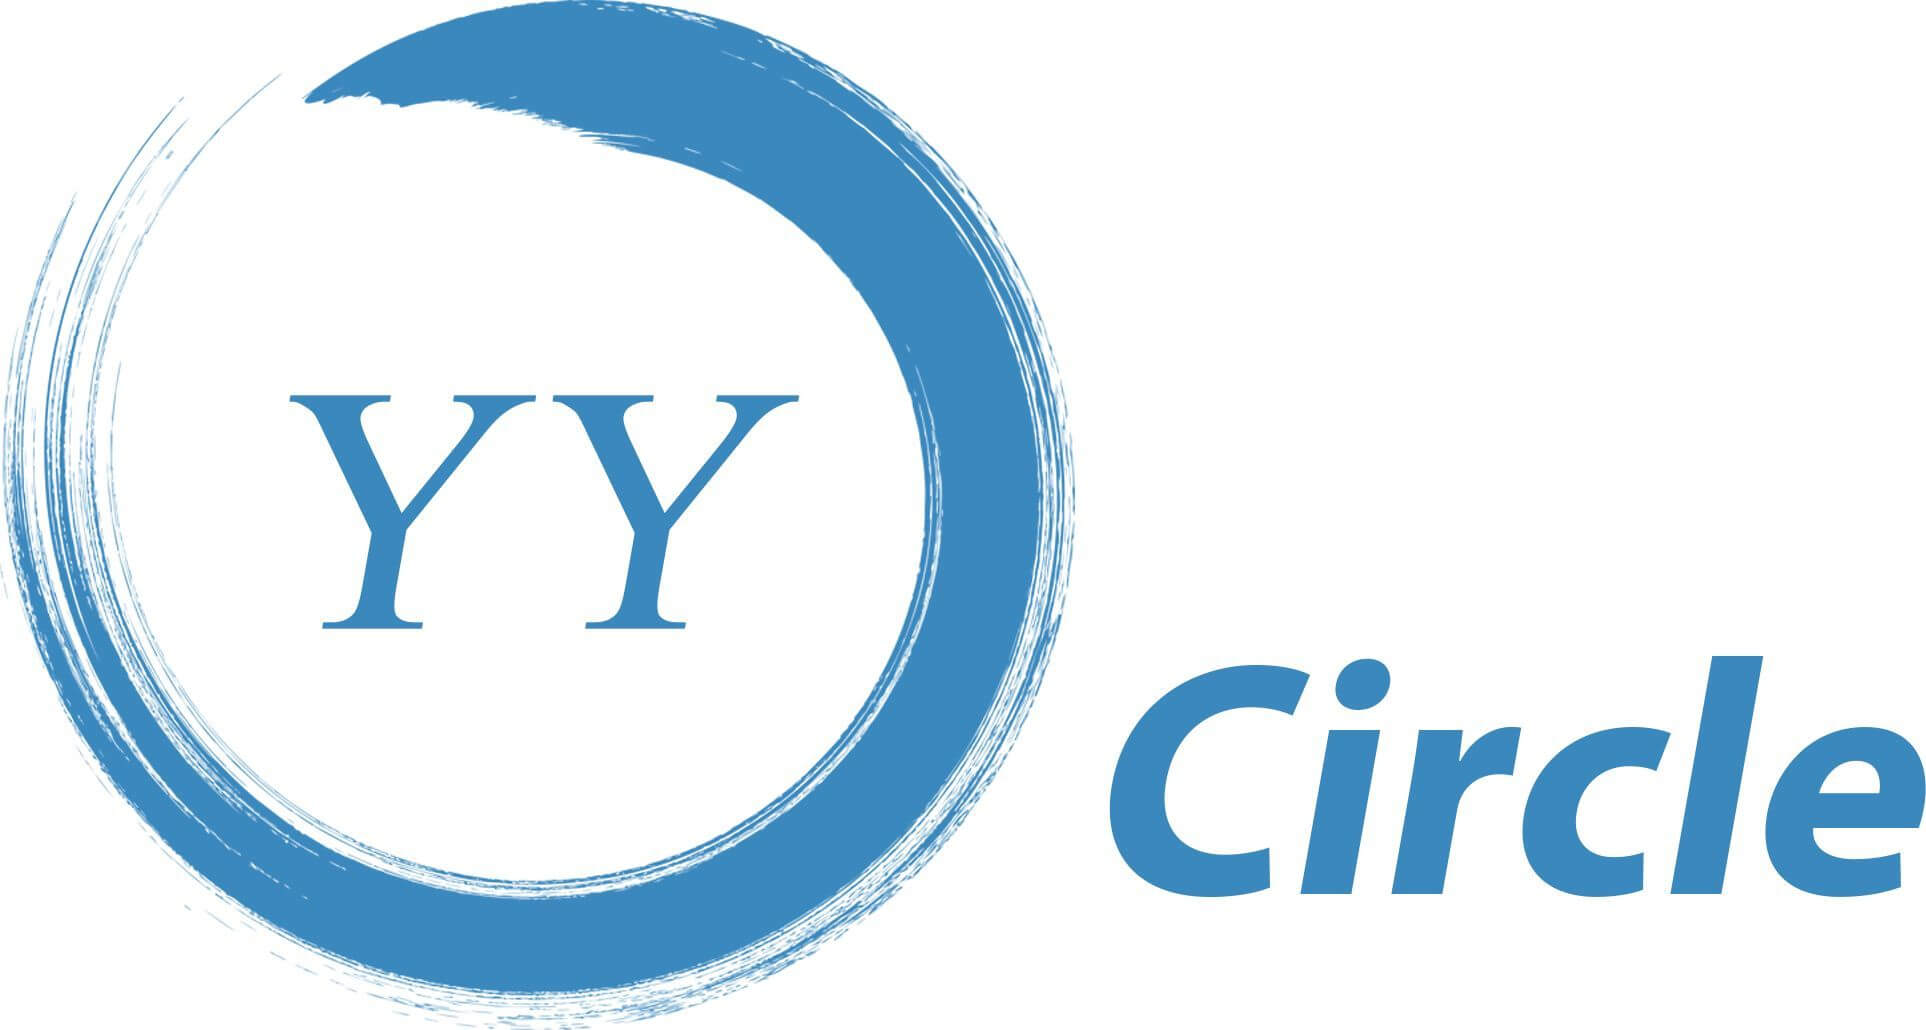 Company logo for Yy Circle (sg) Private Limited